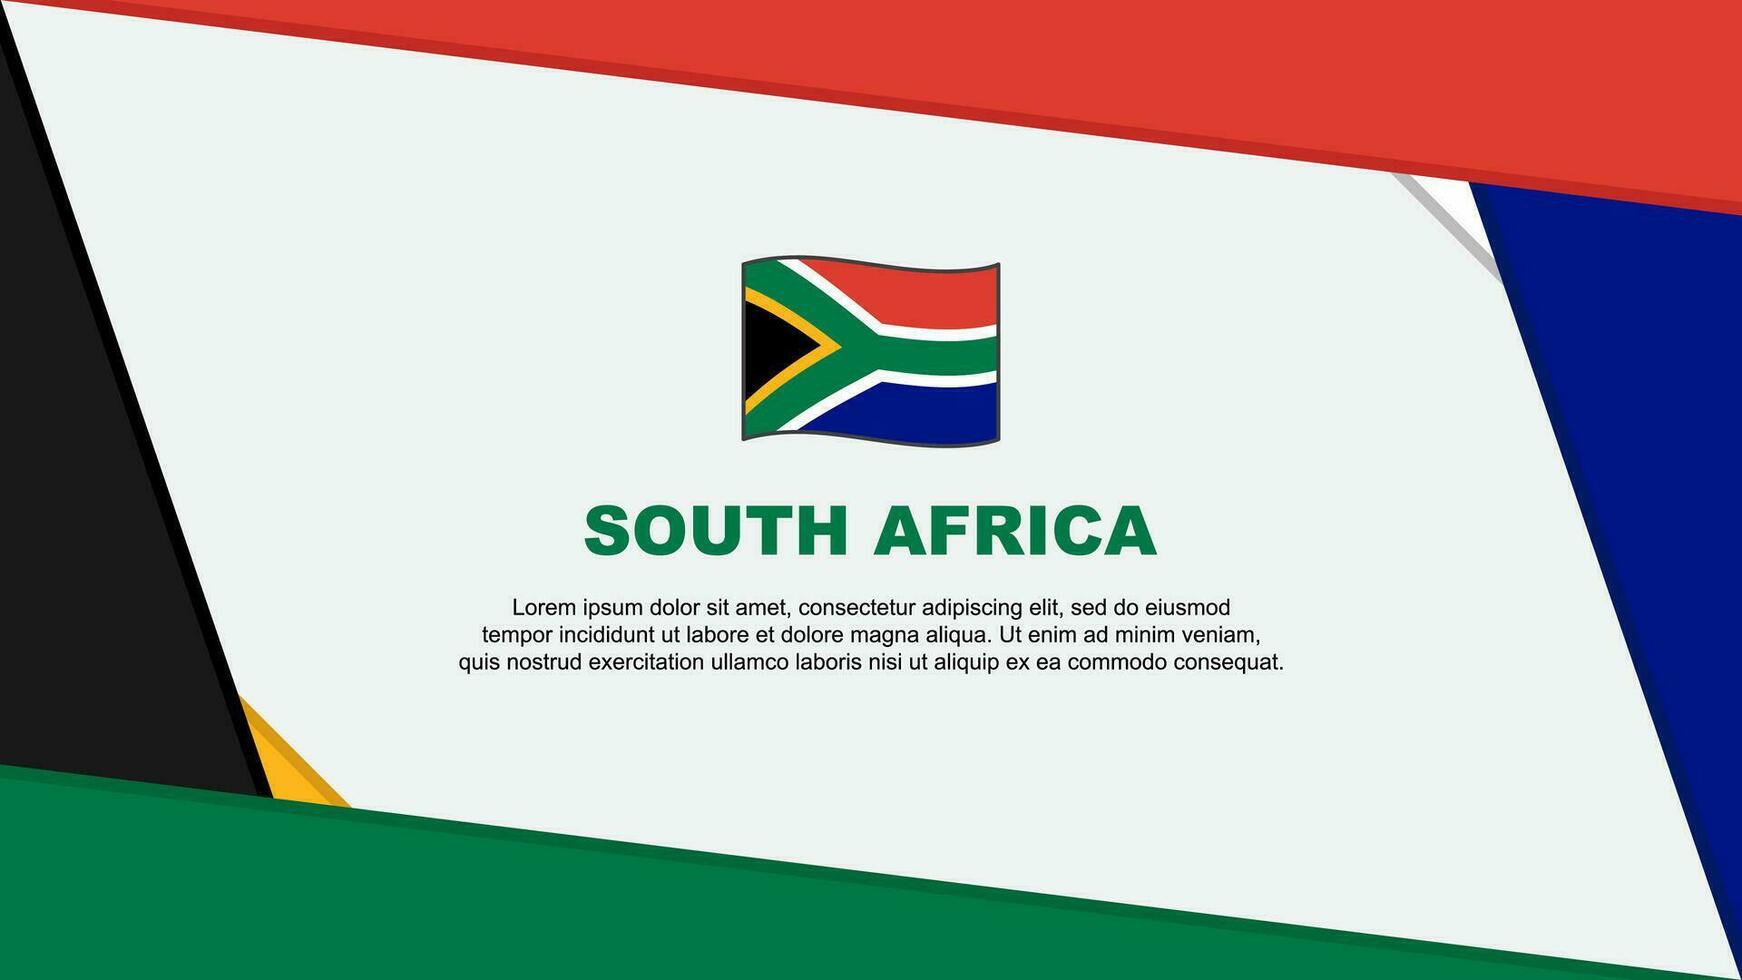 South Africa Flag Abstract Background Design Template. South Africa Independence Day Banner Cartoon Vector Illustration. South Africa Independence Day